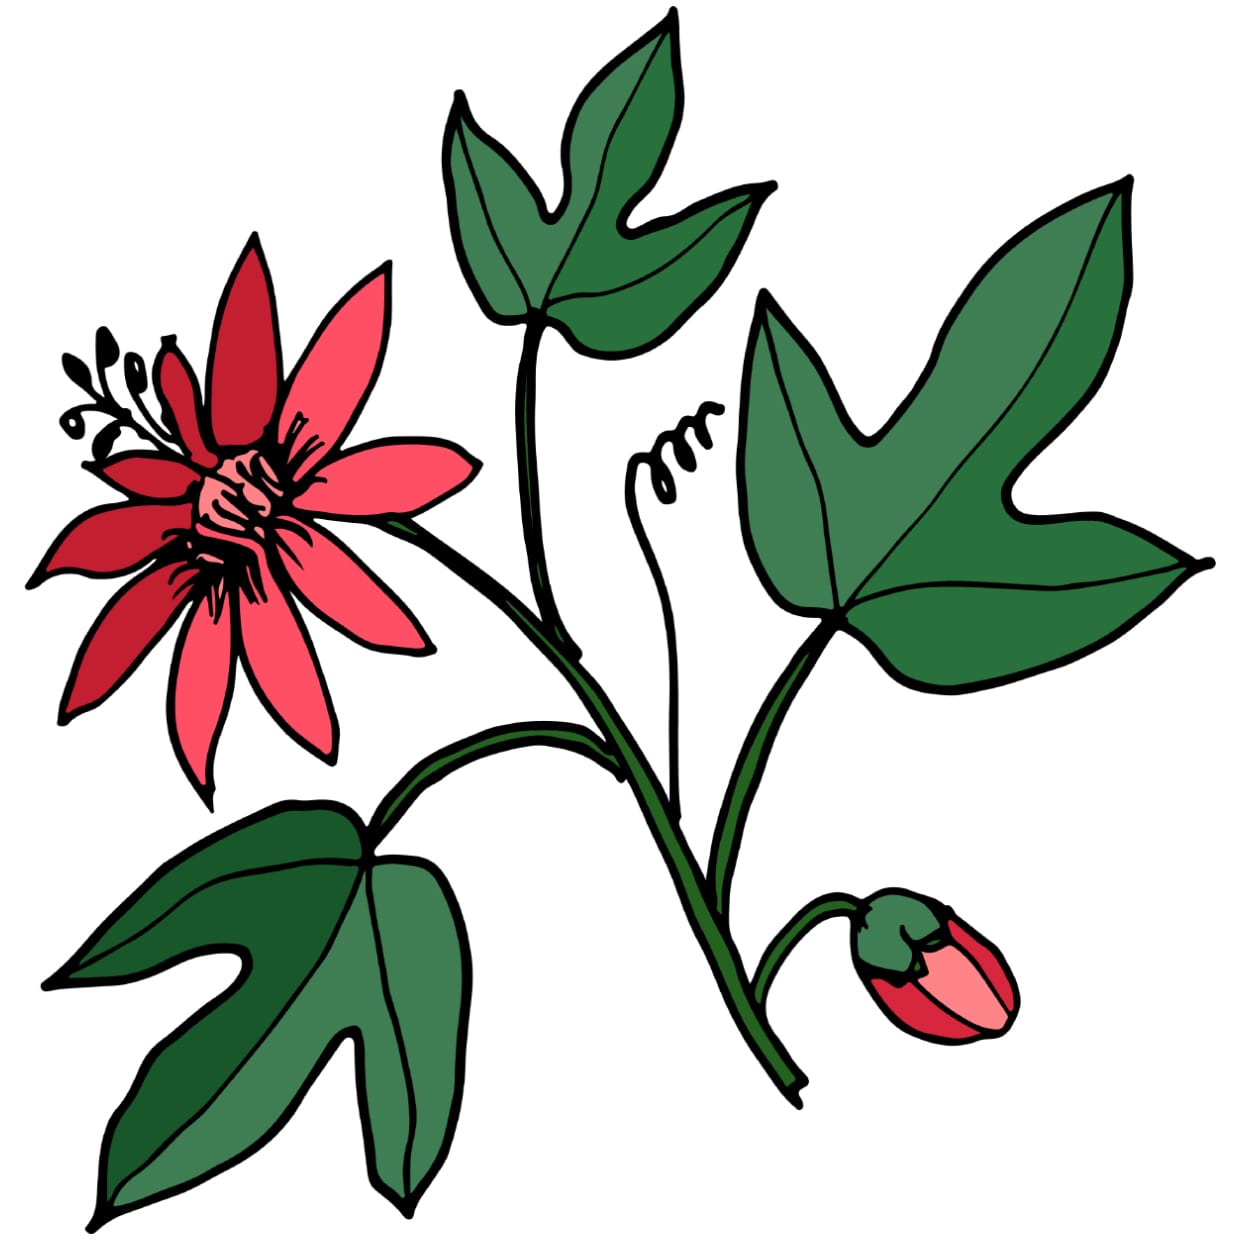 An illustration of a passionflower plant.